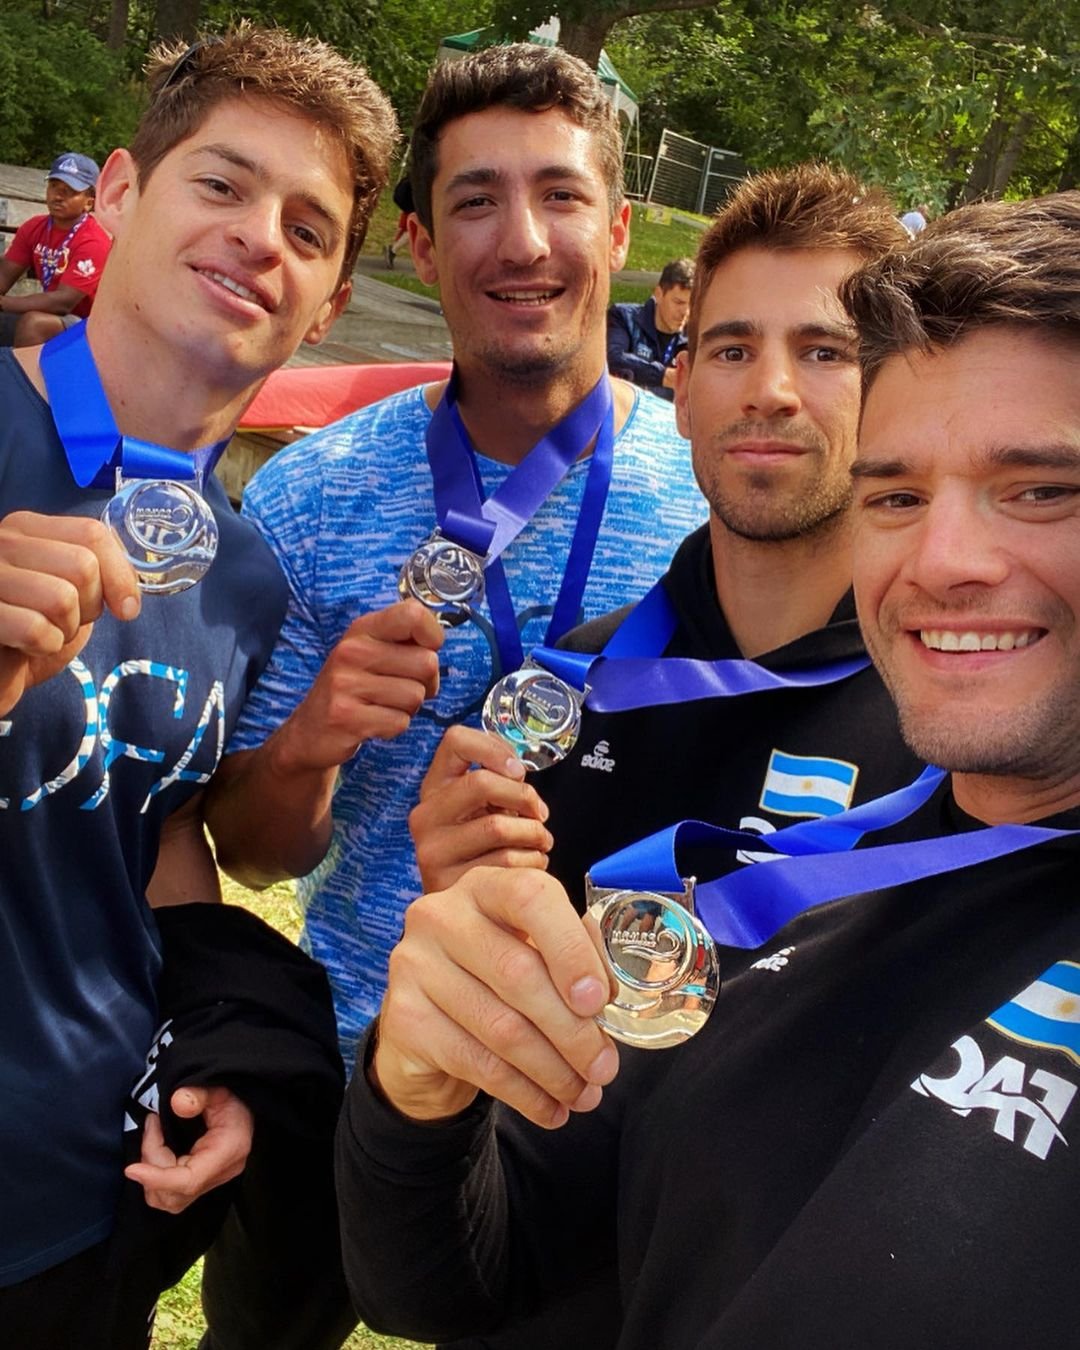 Argentina brought in seven medals from the Pan American Canoeing Championship in Canada - Argentina Amateur Deporte